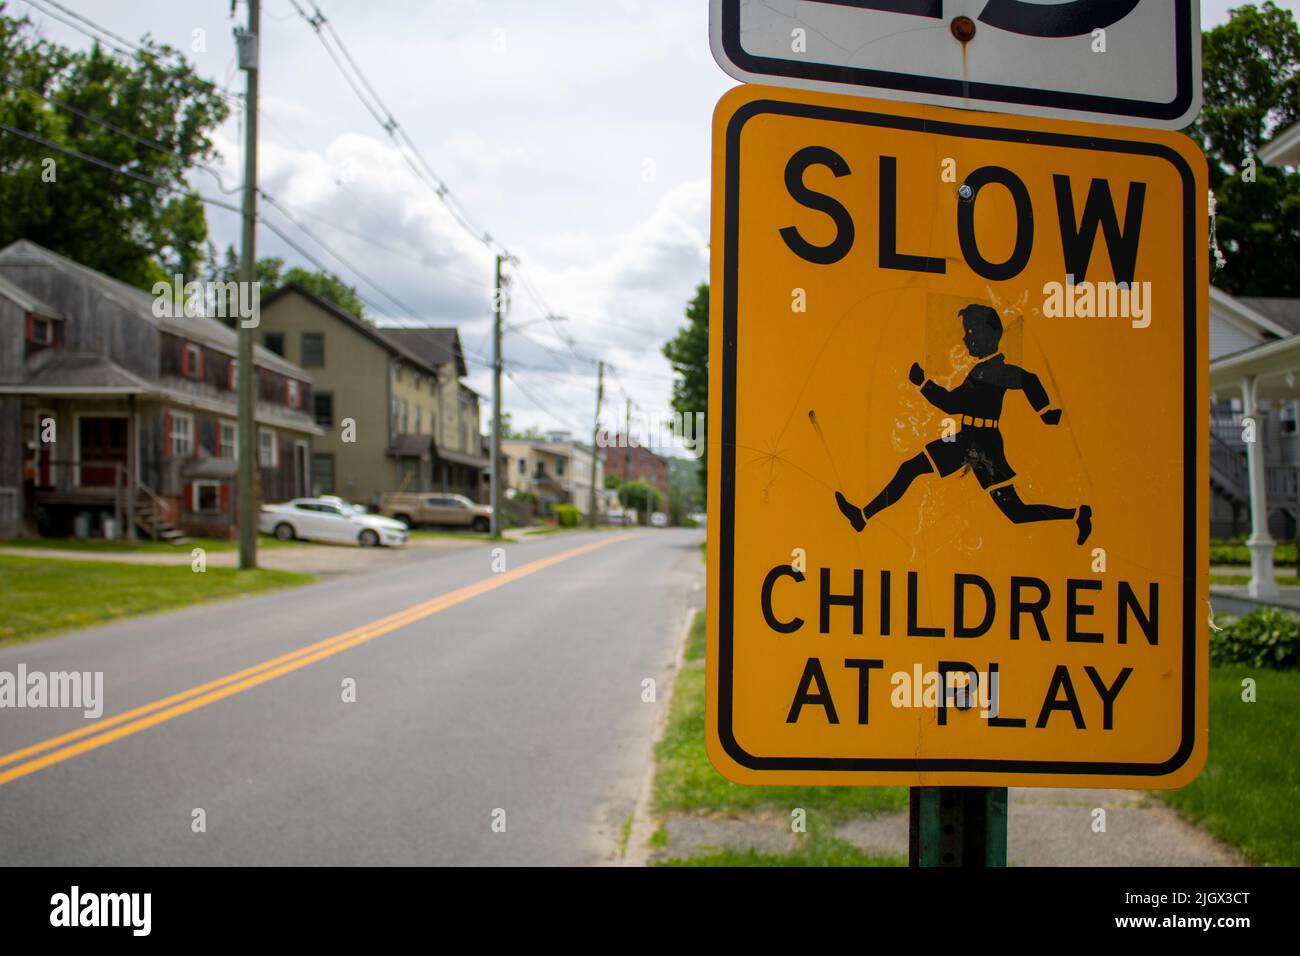 urban outdoor yellow black street sign with a message of Slow children at play icon of running boy Stock Photo